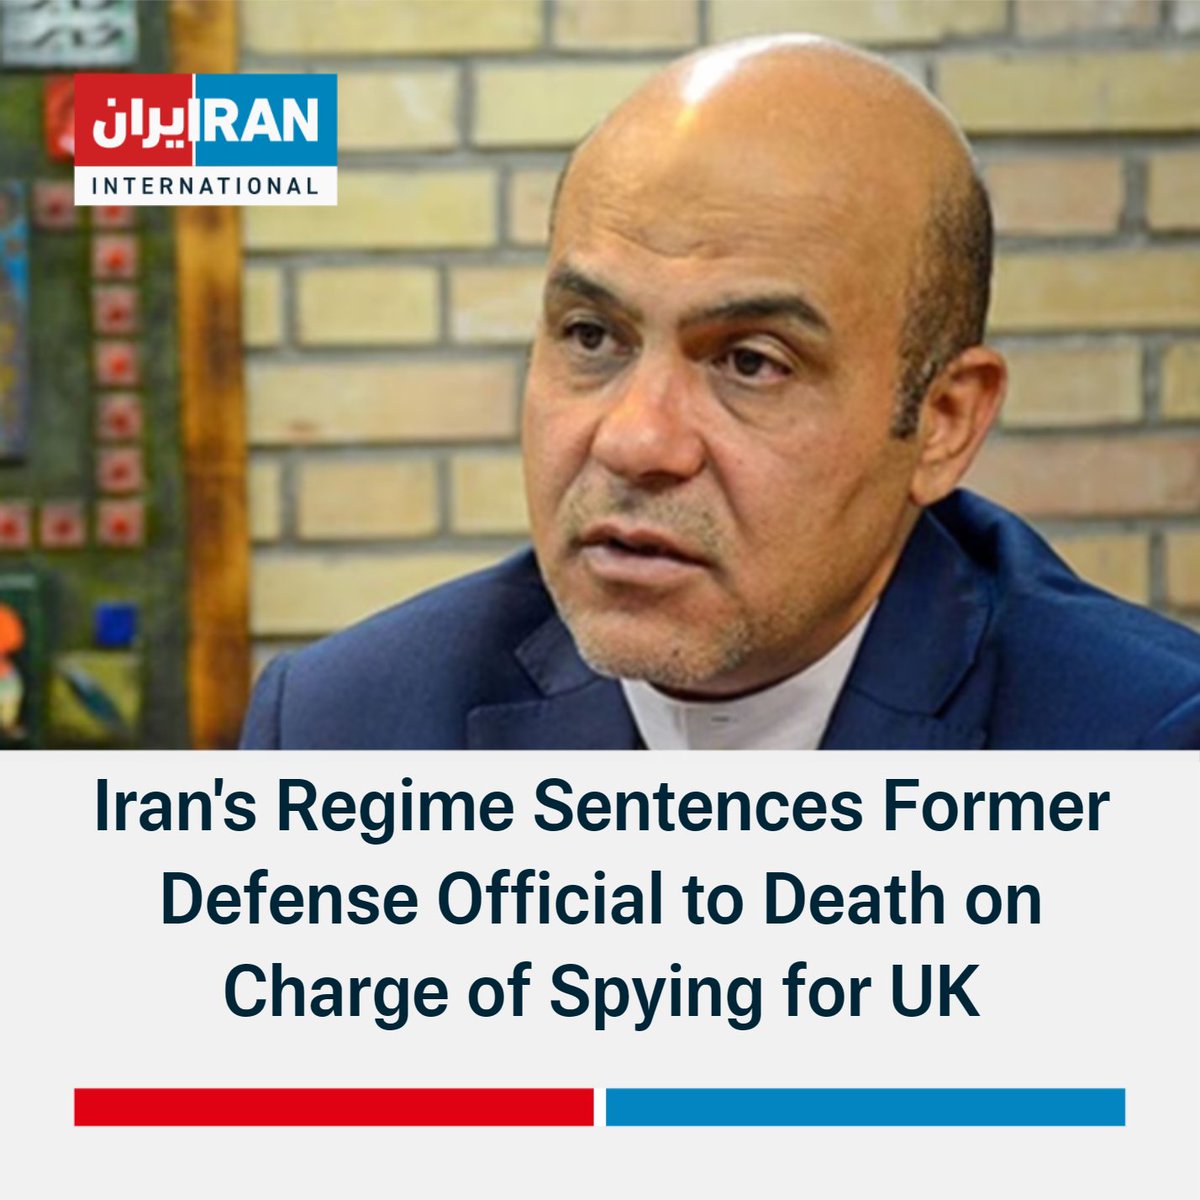 Iran's Judiciary says the country's Supreme Court has upheld the death sentence of Alireza Akbari, a former Deputy Minister of Defense on charge of spying for UK intelligence service.  There are reports that Akbari, who was arrested in 2019-20, held UK citizenship